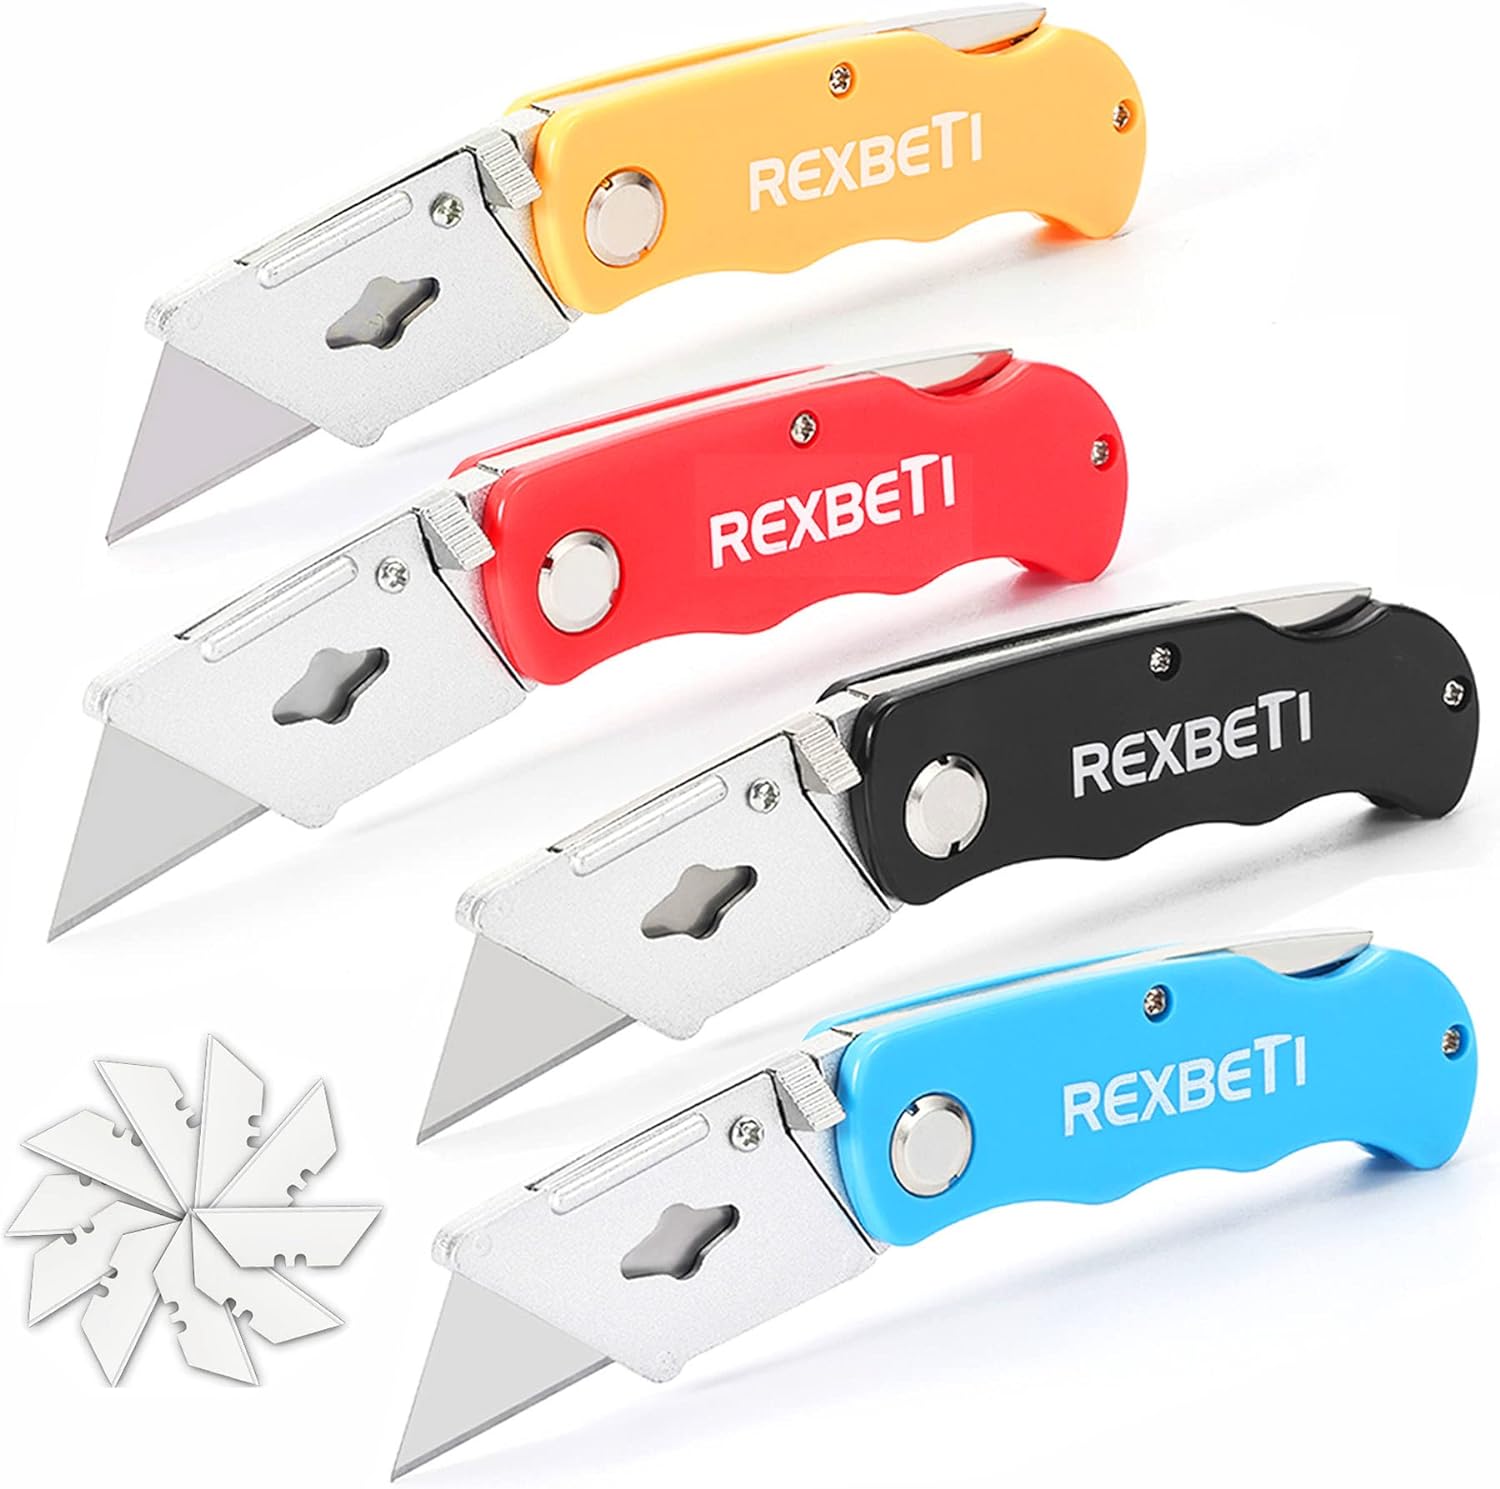 REXBETI 4-Pack Folding Utility Knife Quick-change SK5 Box Cutter for Cartons, Cardboard and Boxes, Back-lock Mechanism with 10 Extra Bl